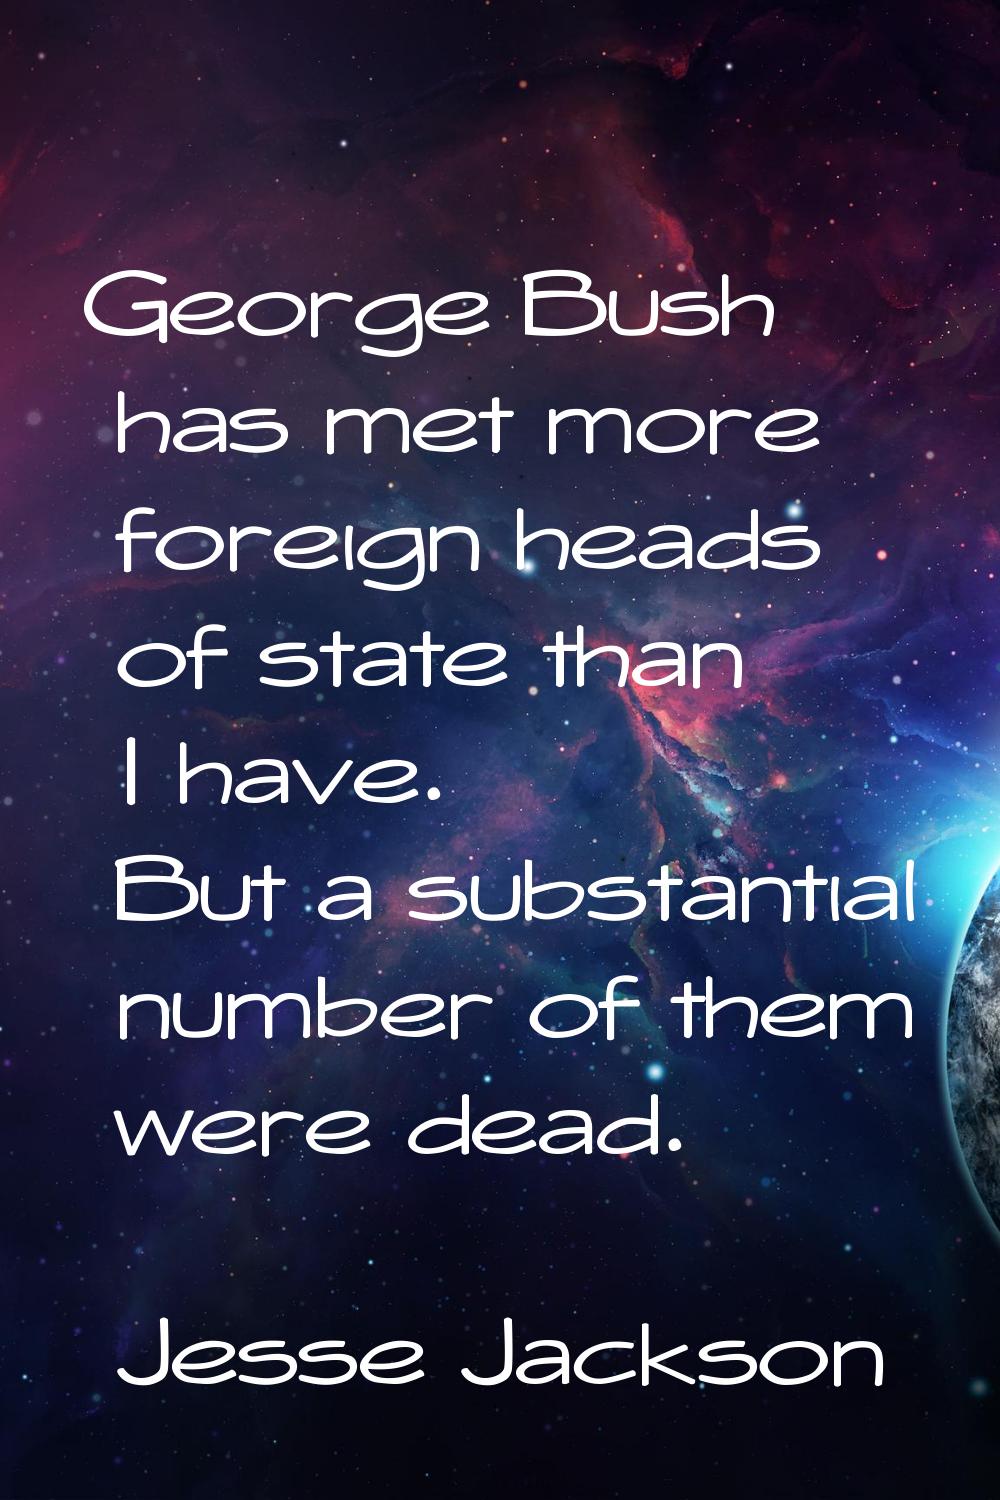 George Bush has met more foreign heads of state than I have. But a substantial number of them were 